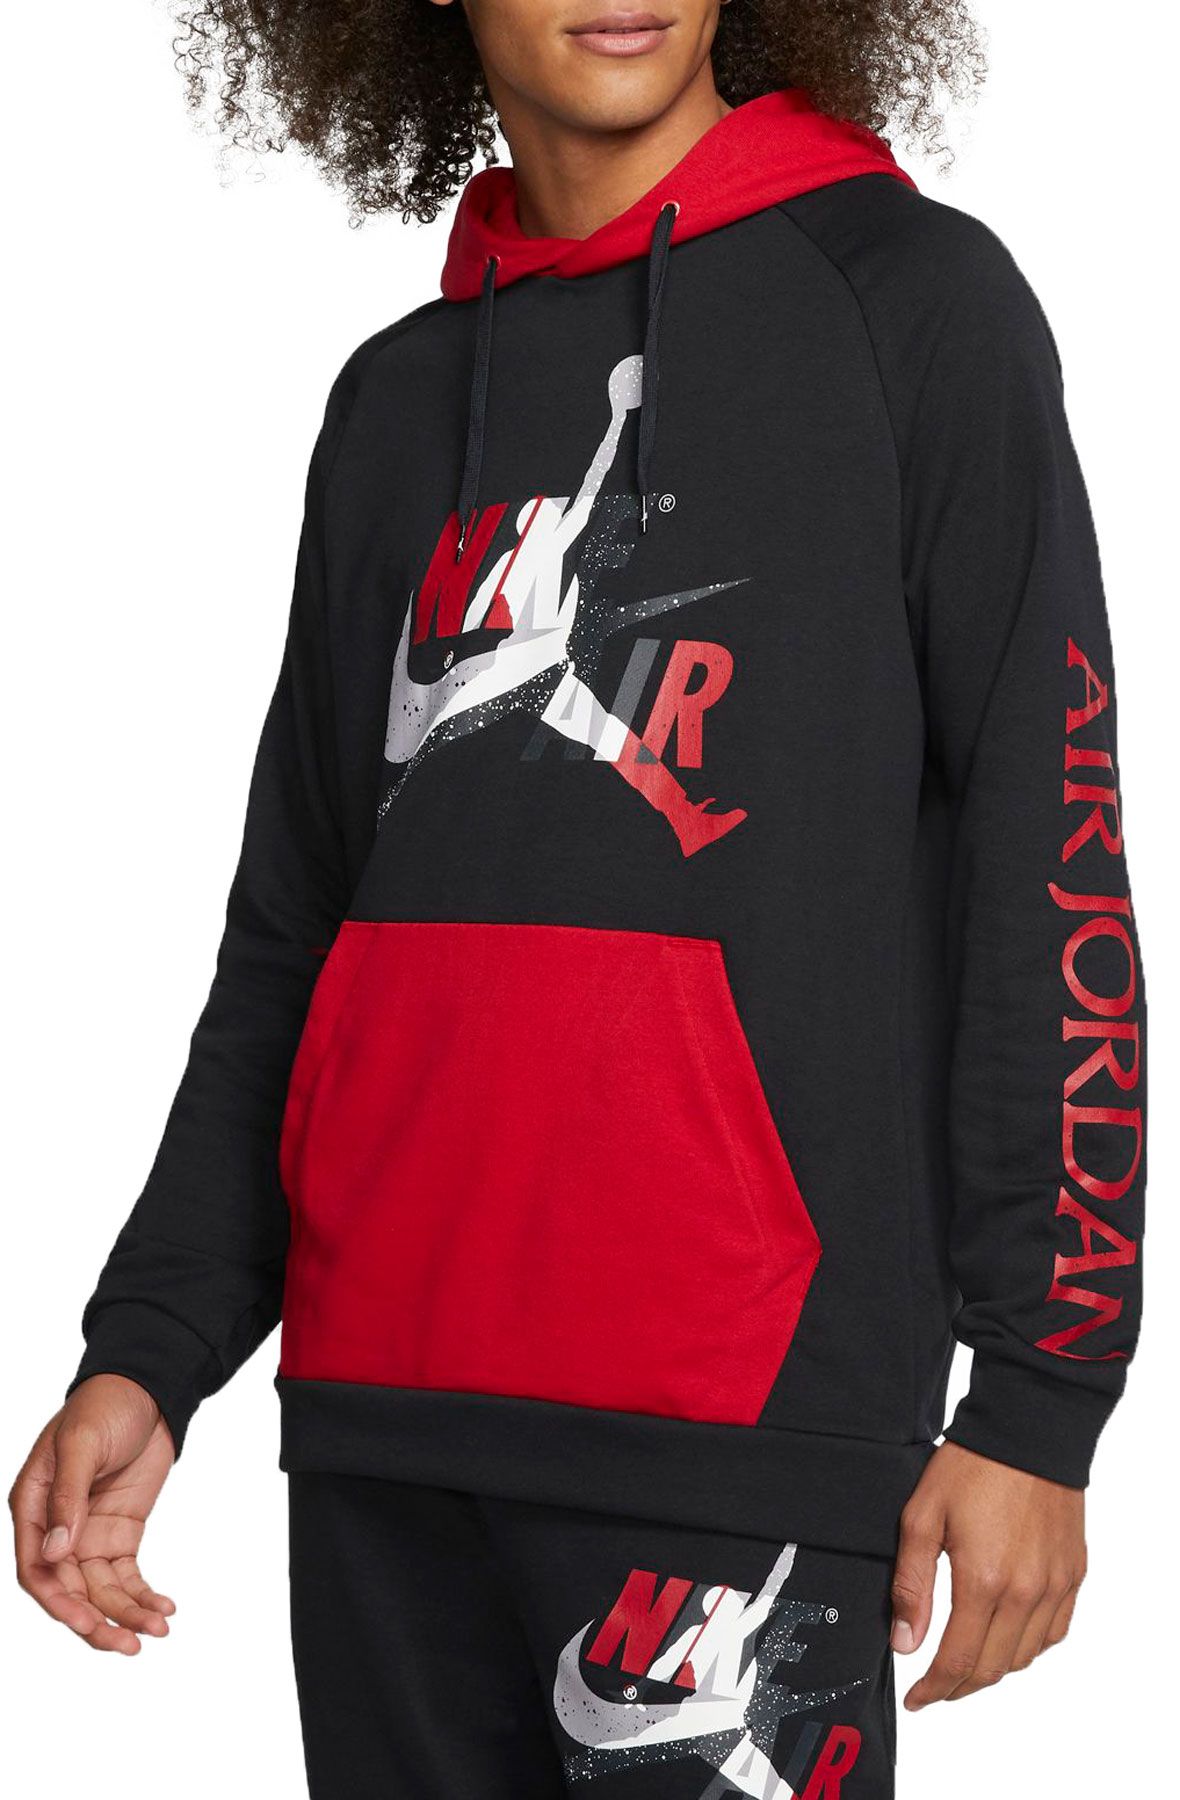 jumpman red and black